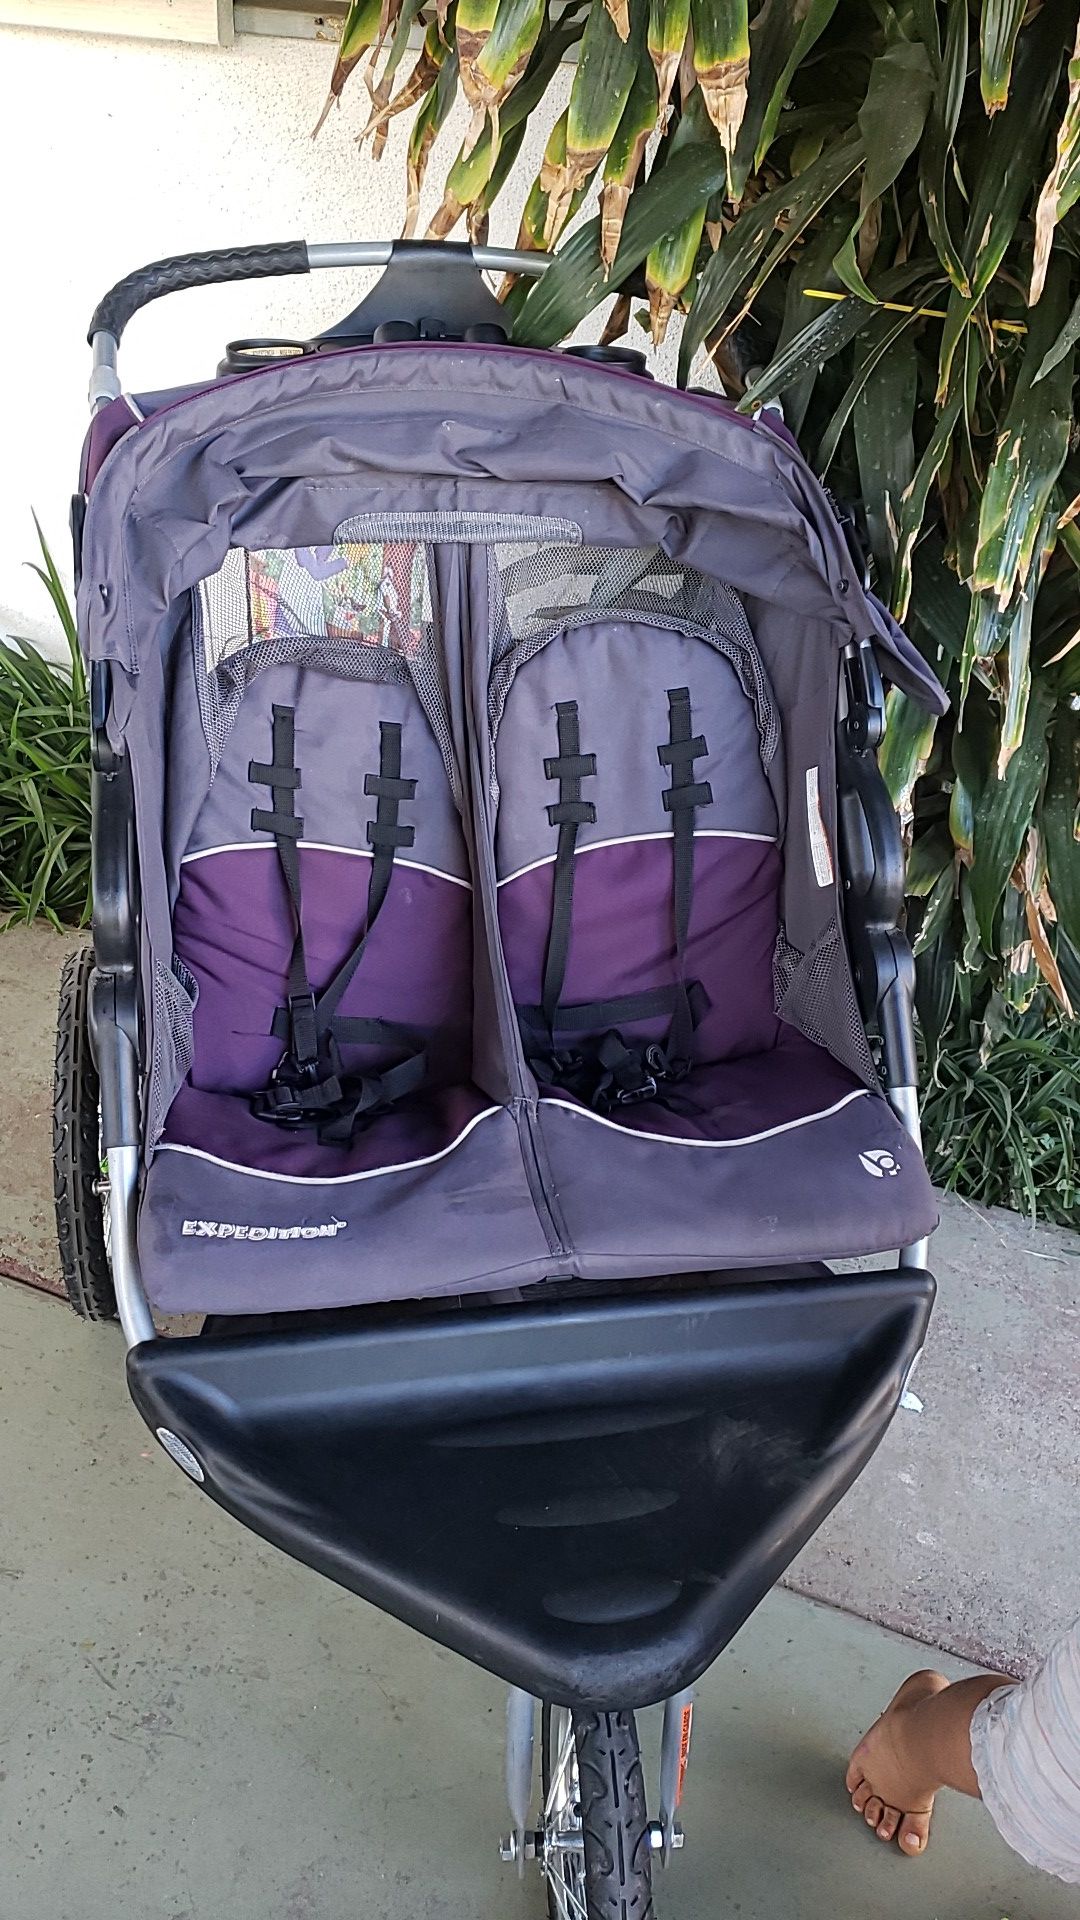 Expedition stroller